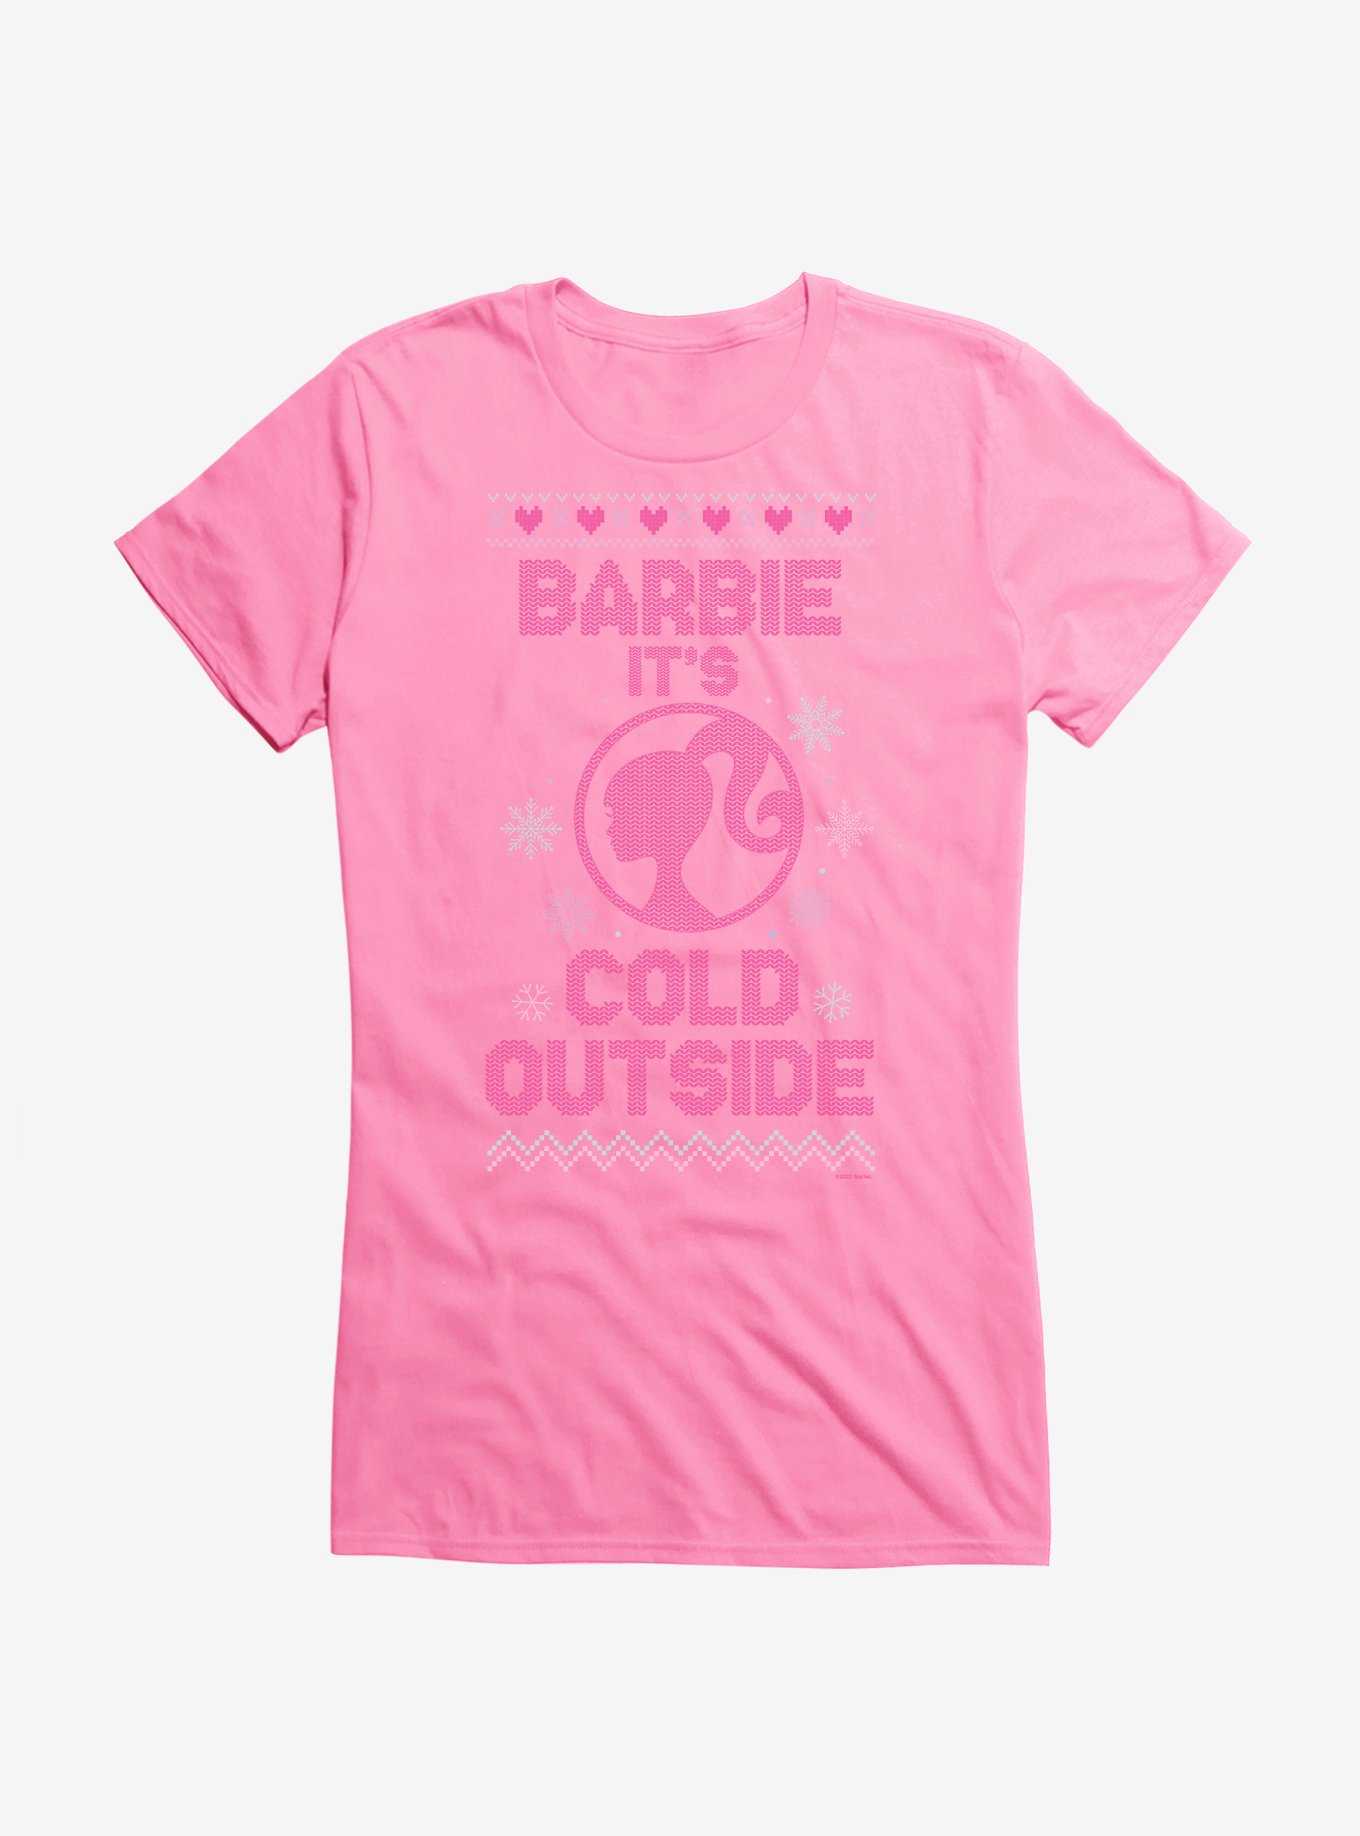 Barbie It's Cold Outside Ugly Christmas Pattern Girls T-Shirt, , hi-res